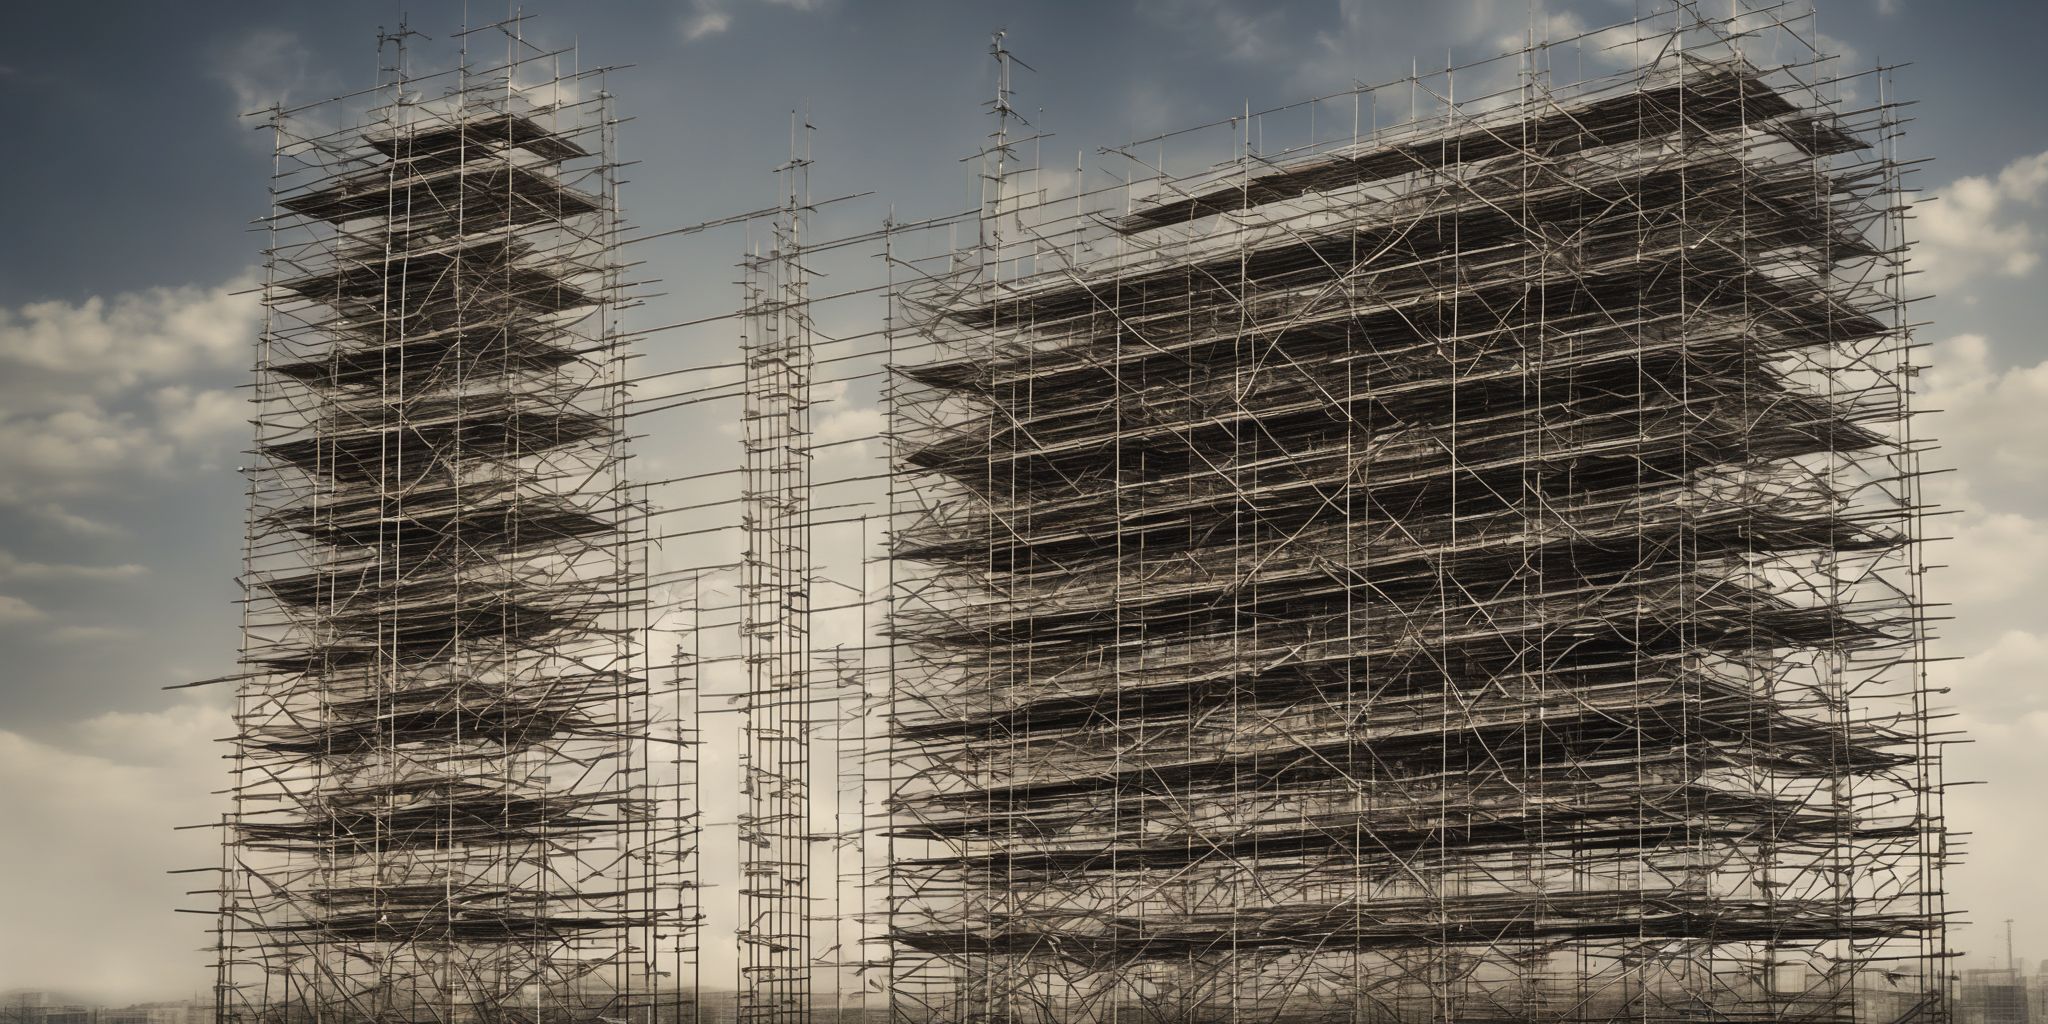 Scaffolding  in realistic, photographic style